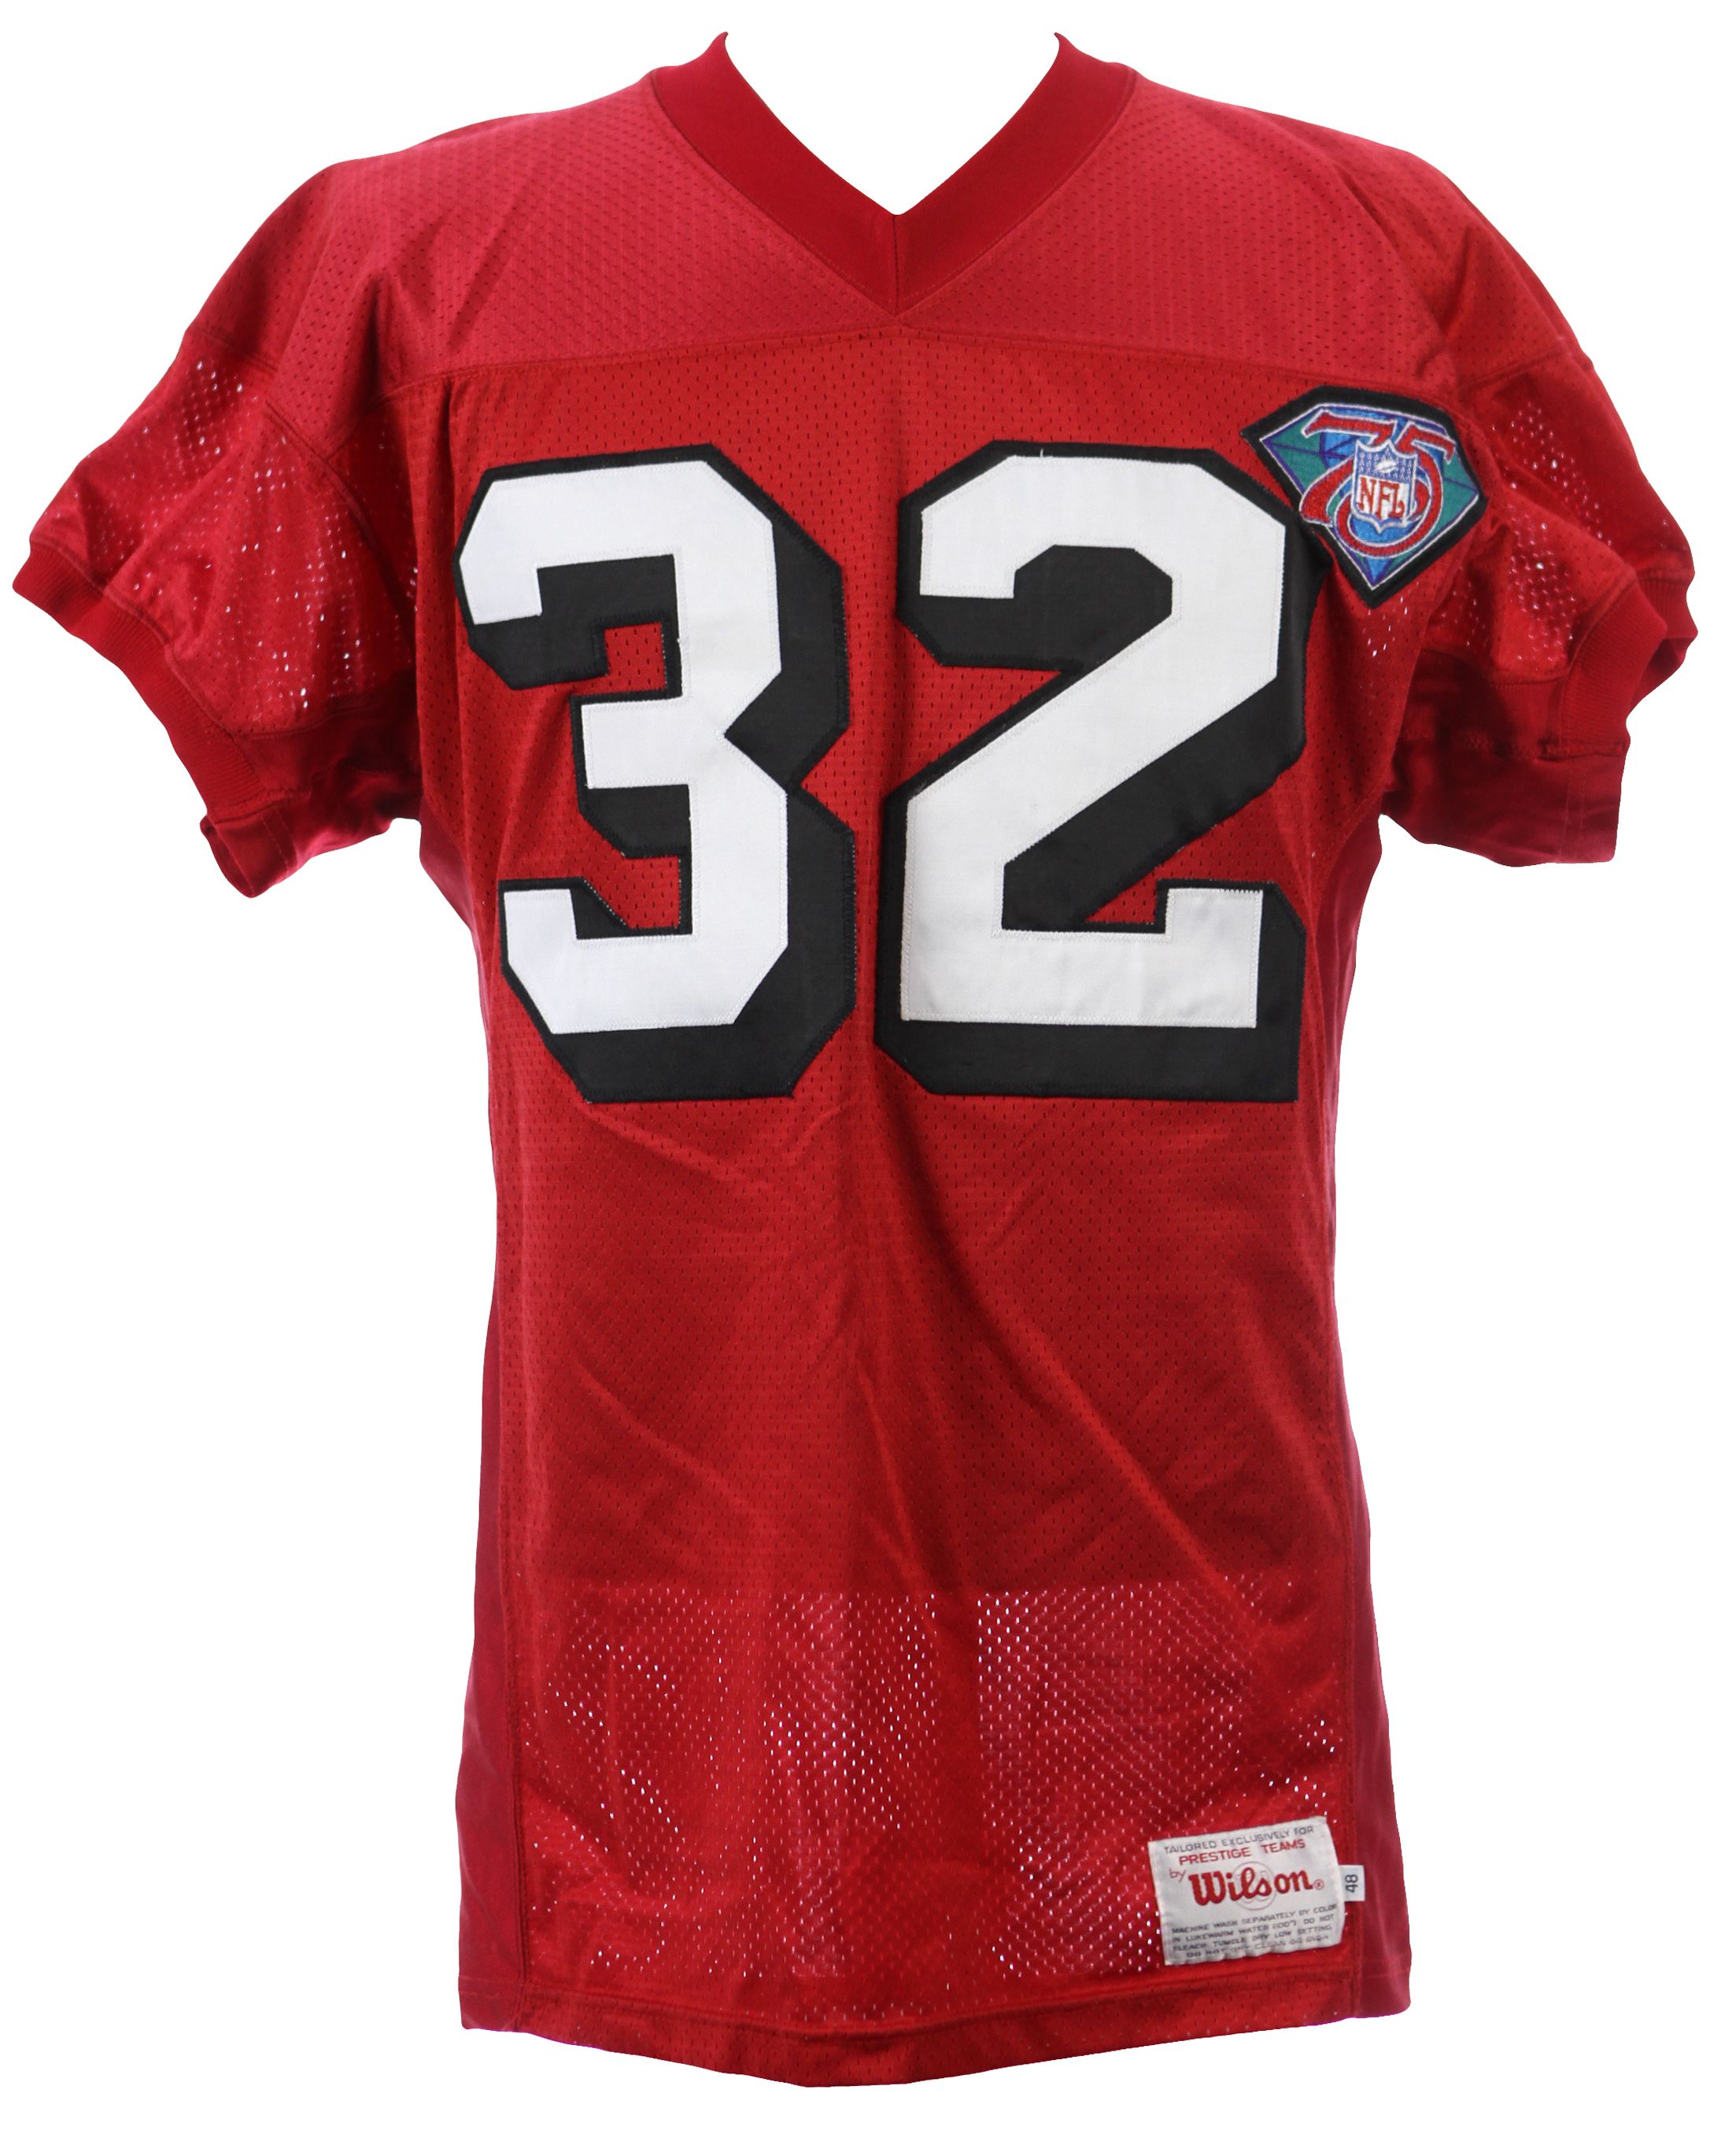 49ers 75th anniversary jersey